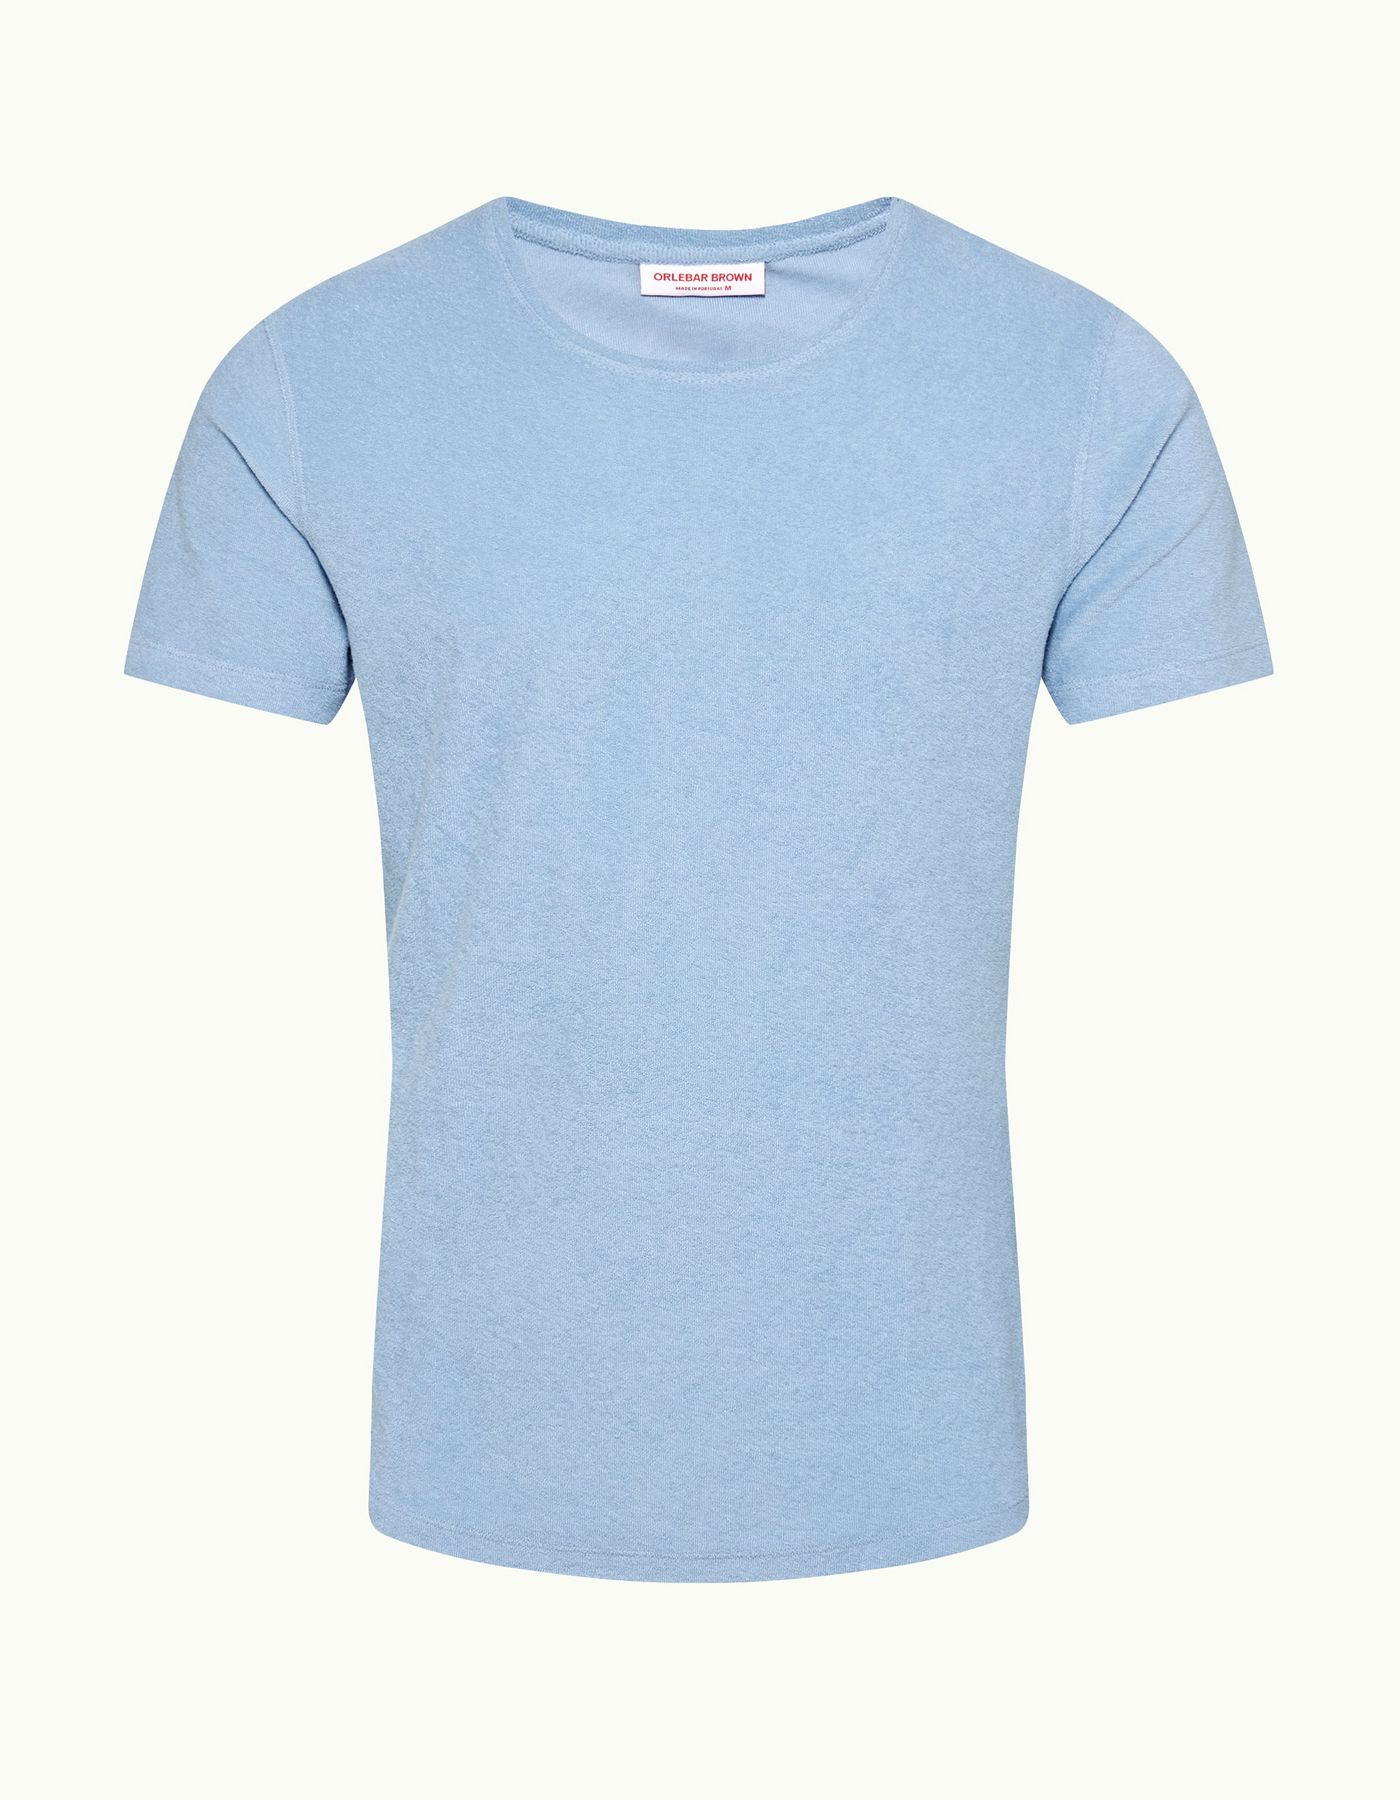 Ob-T Towelling - Mens Crew Neck Organic Cotton Towelling T-shirt In Blue Ash